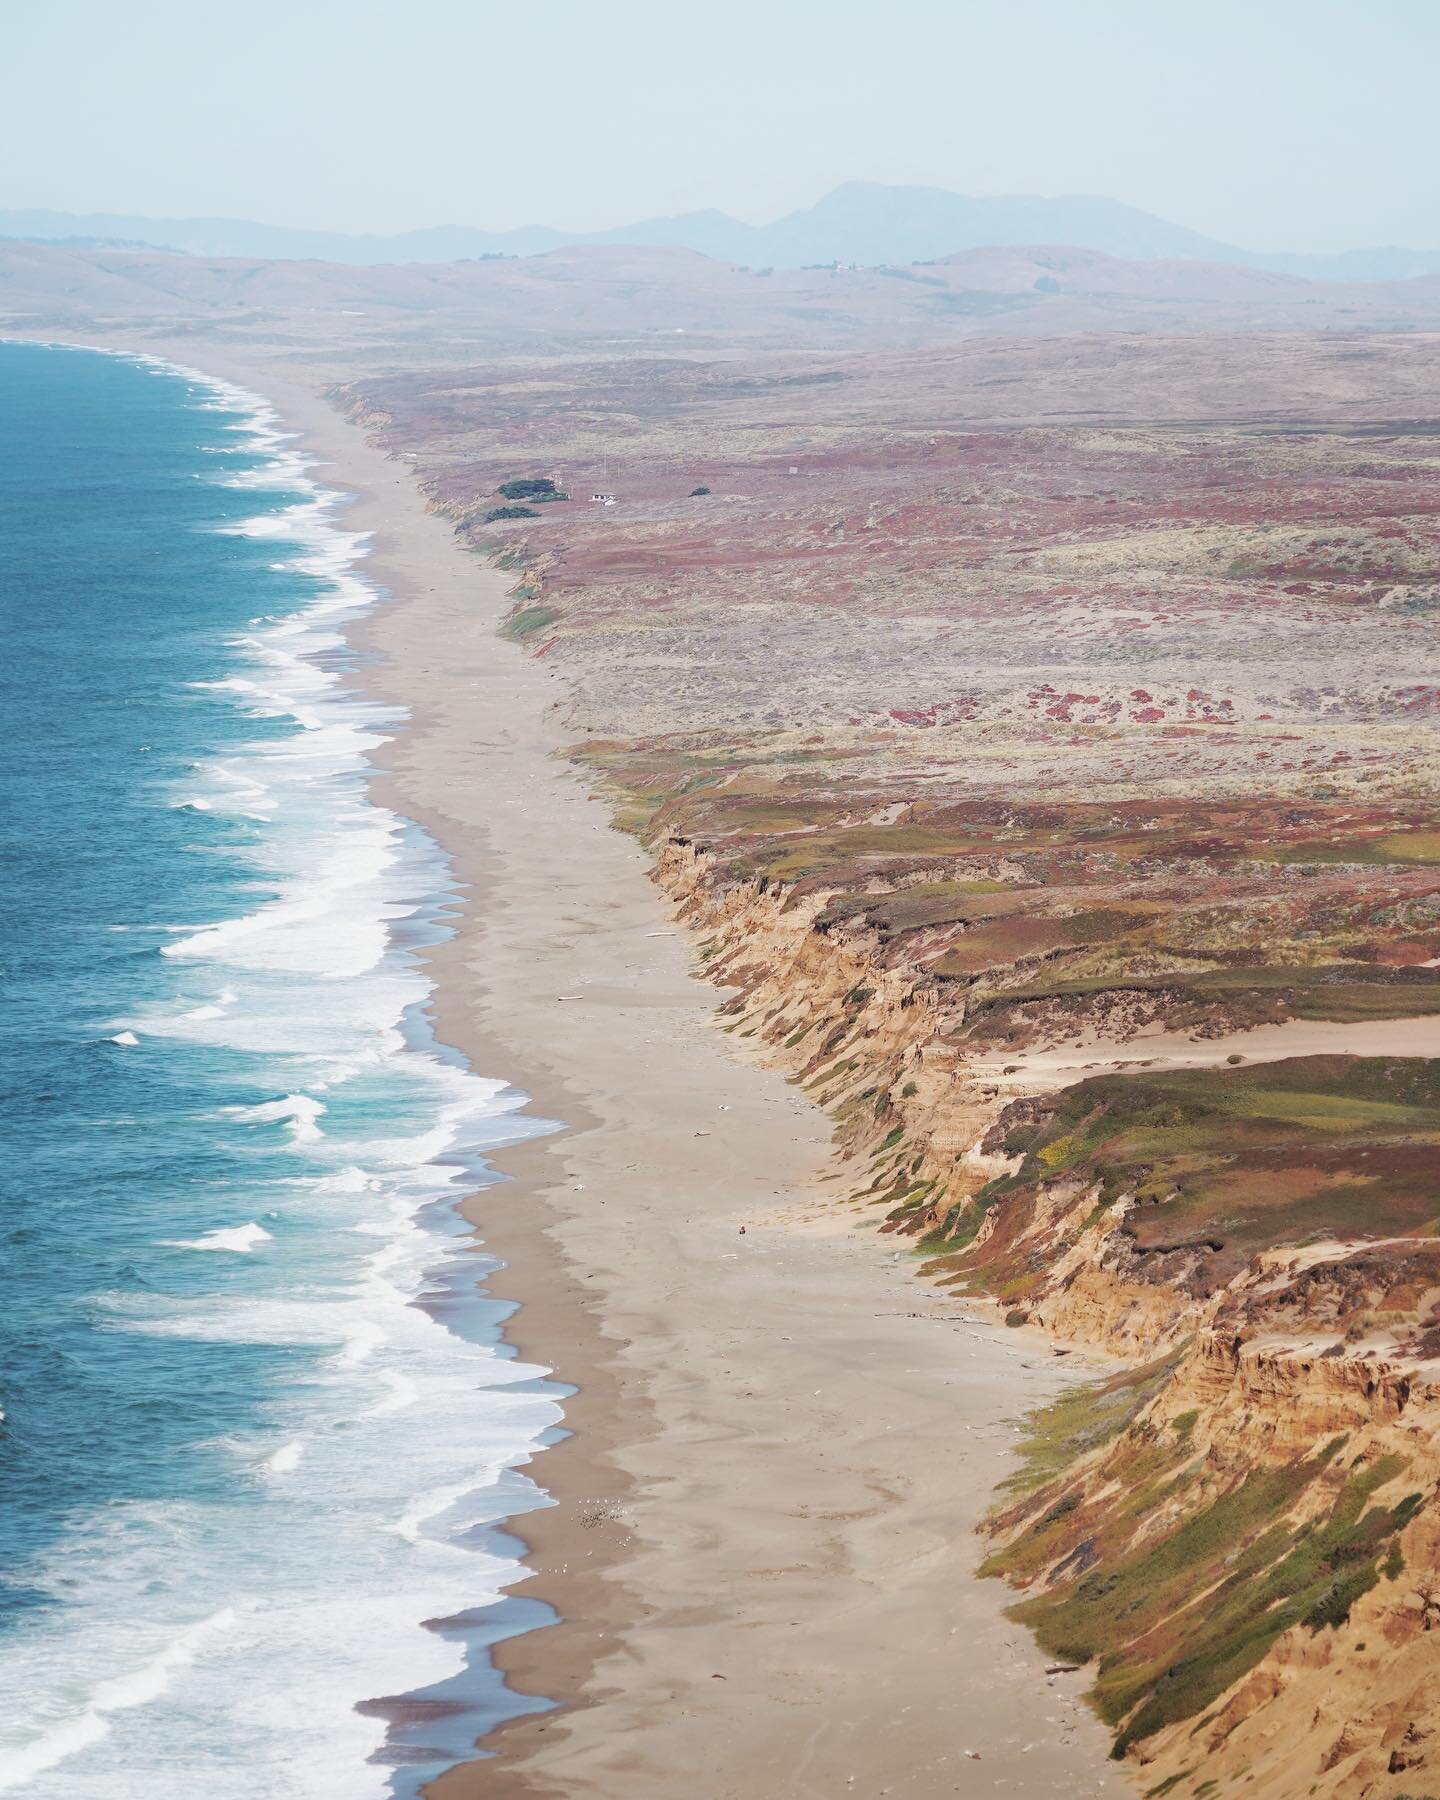 We started our trip in Canada and finished it in San Francisco. Before reaching the city, we headed out to Point Reyes on what felt like a summer day in October. I kept telling Antoine I couldn't believe how turquoise the ocean was. We took in the vi